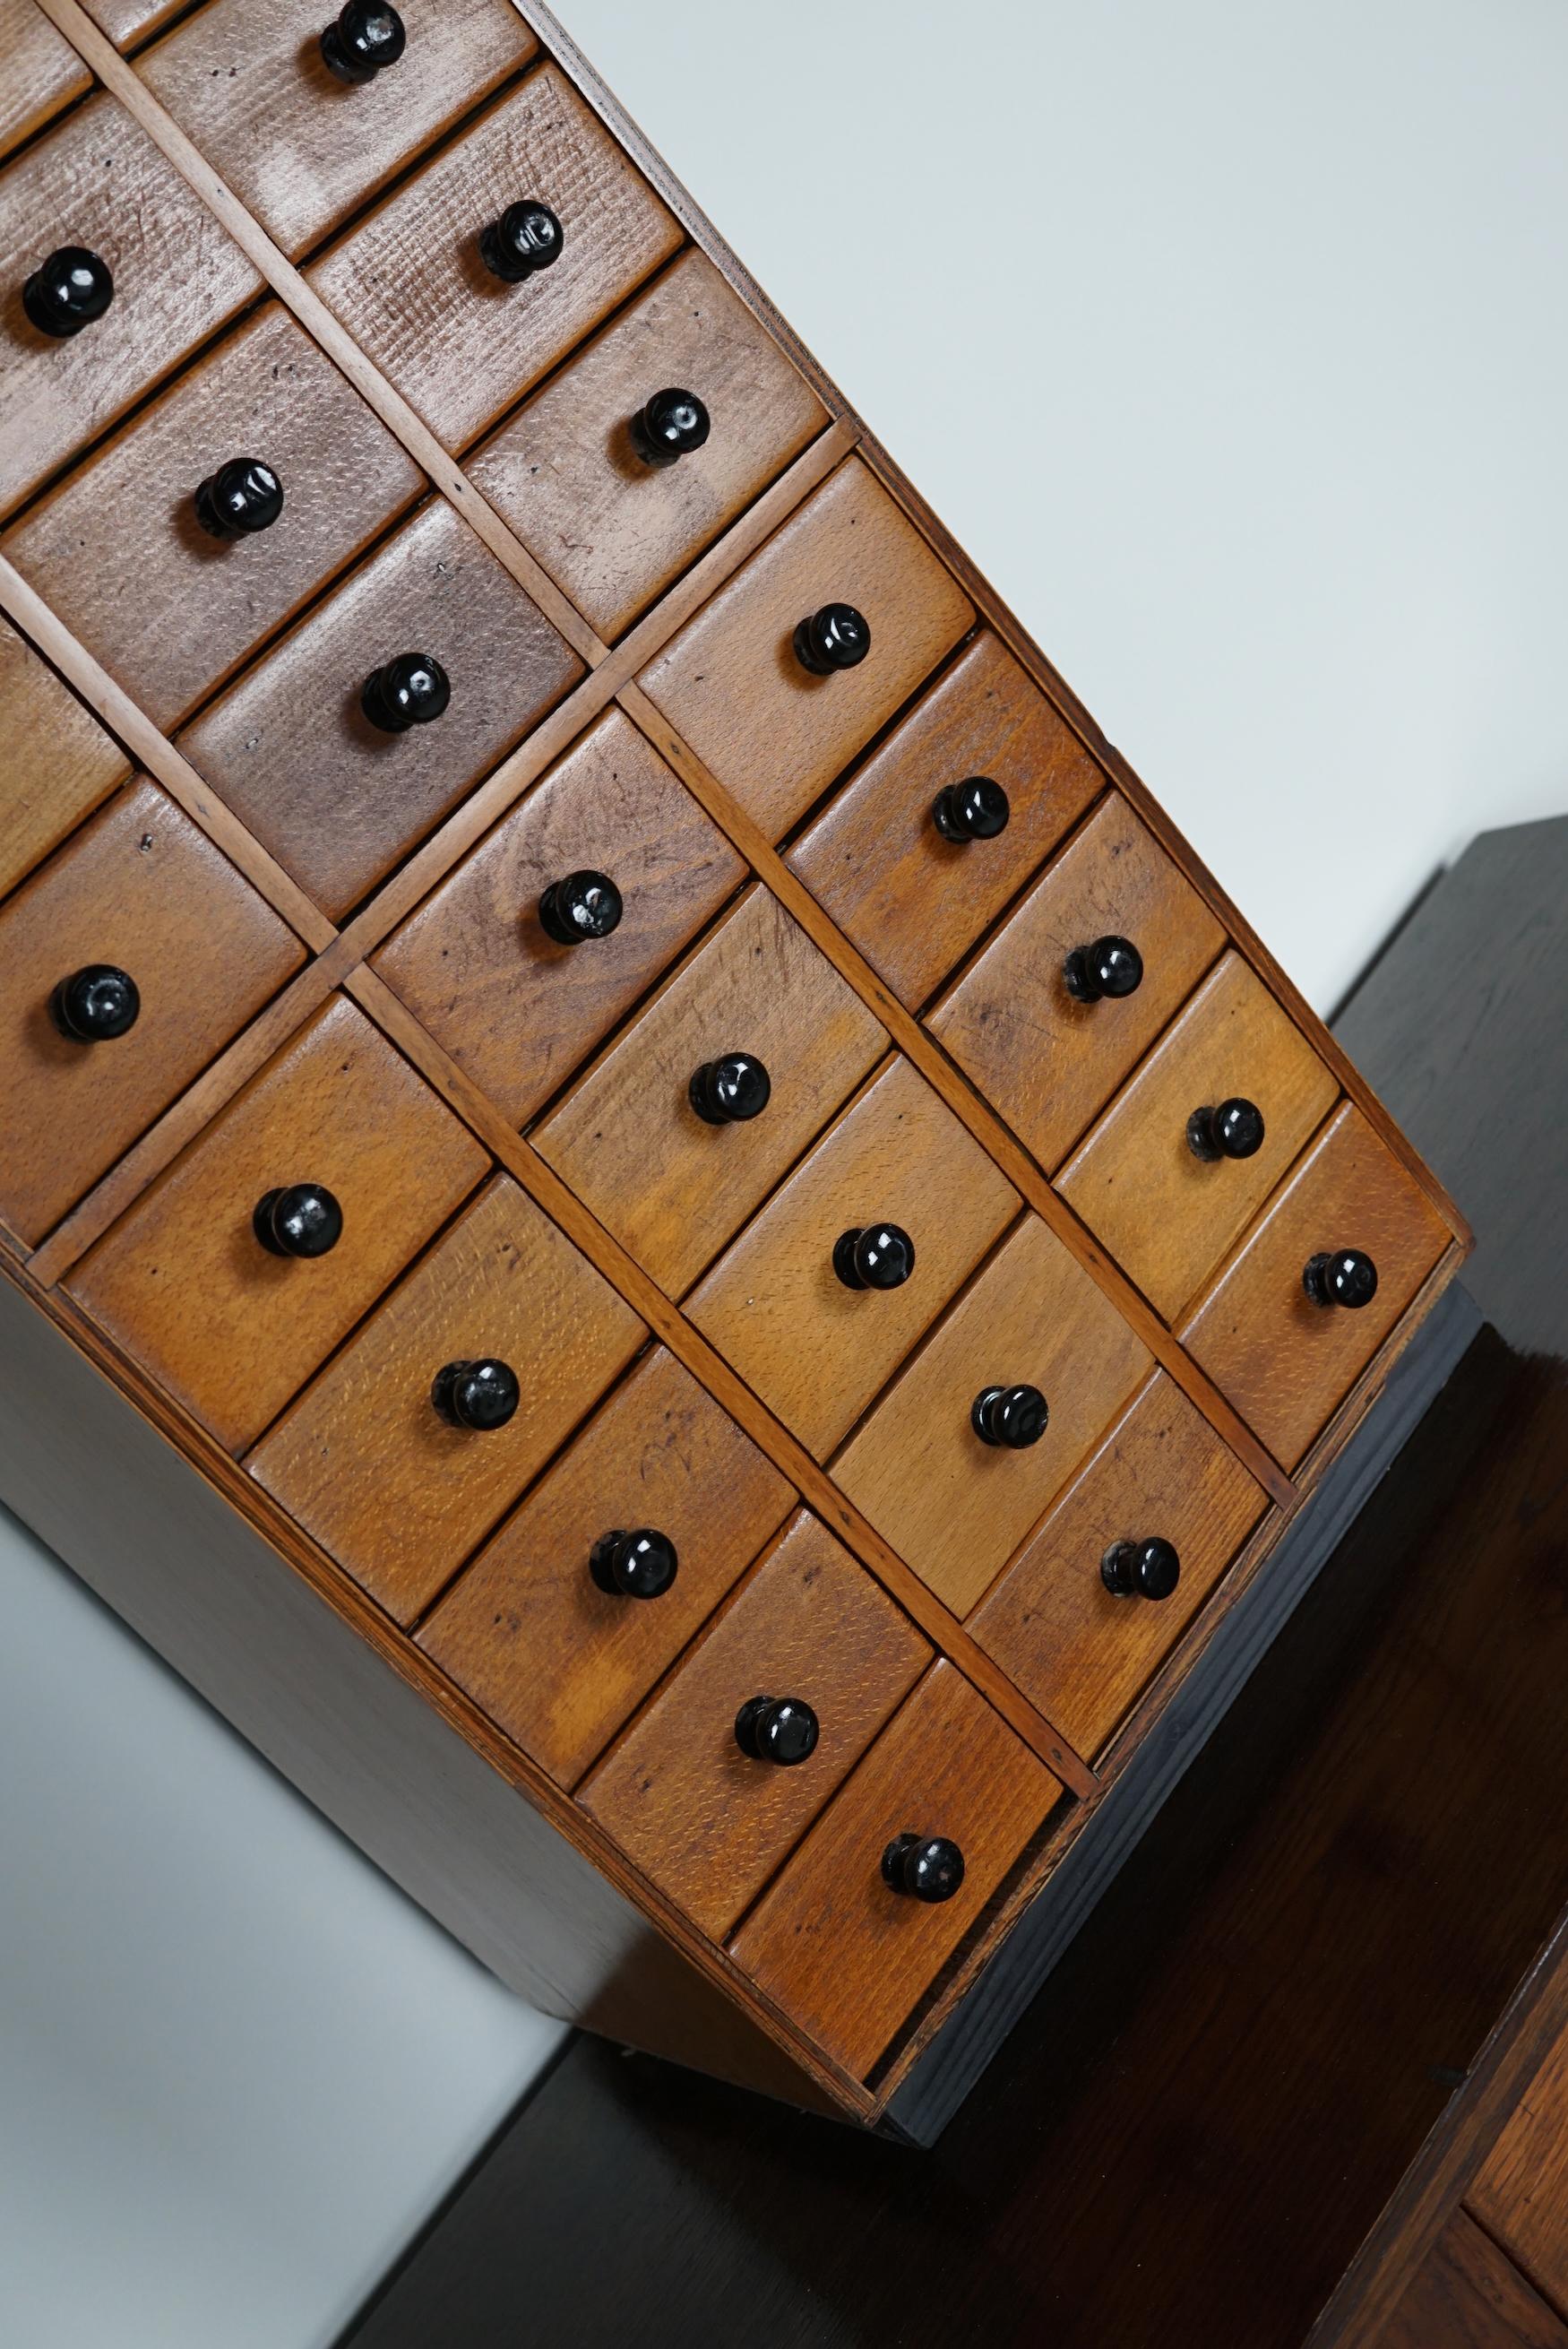 This tabletop cabinet was made around the 1950s in the Netherlands. It features 27 small drawers with black metal knobs. It remains in a good condition. The interior dimensions of the drawers are: D 18 x W 10 x H 5 cm.